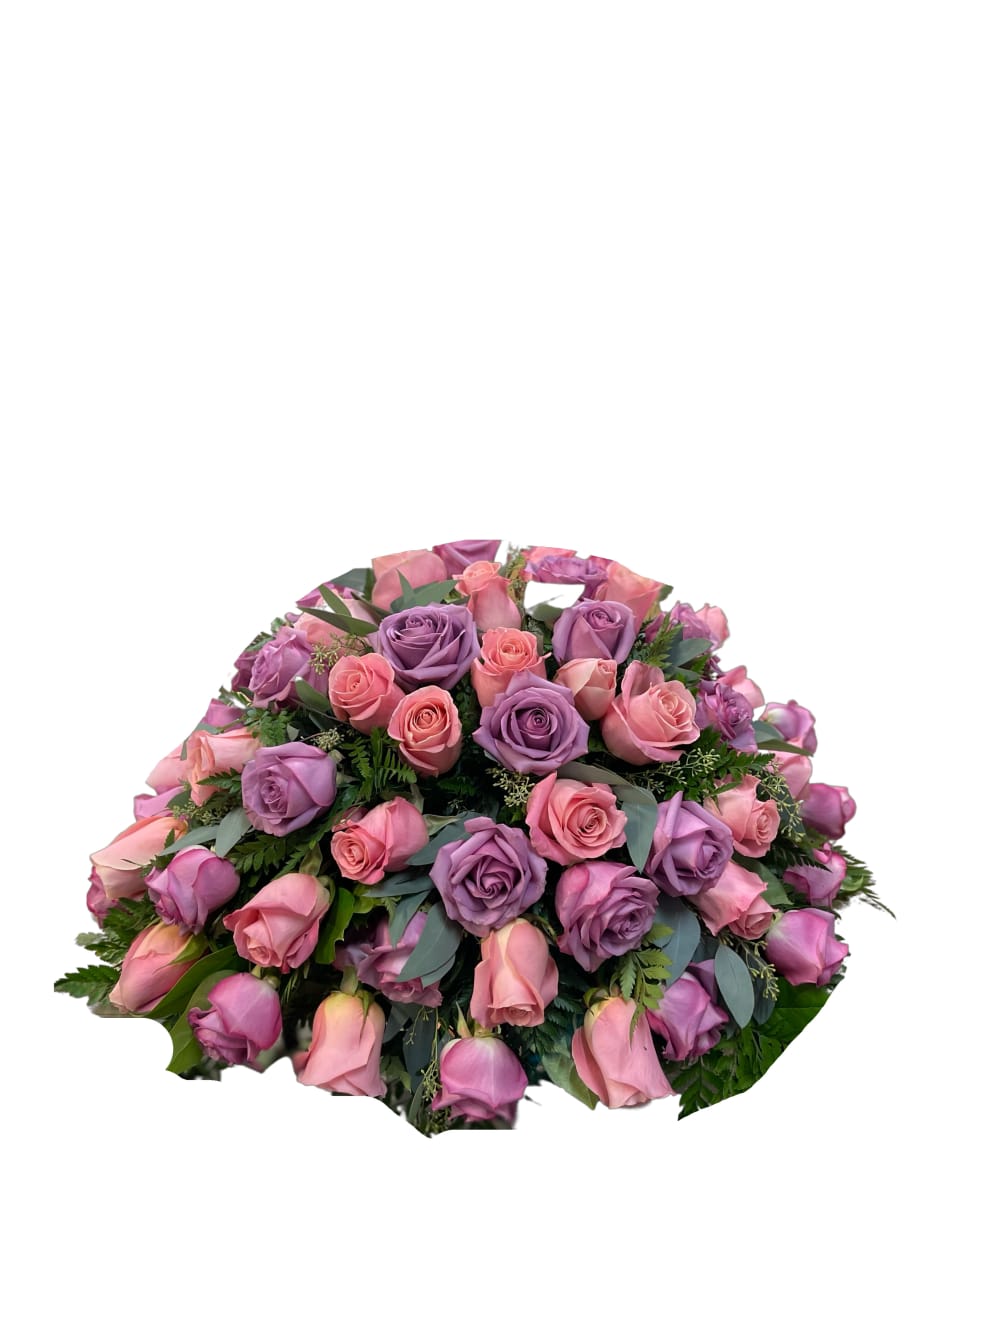 A casket saddle with all roses, pink and roses with an accent